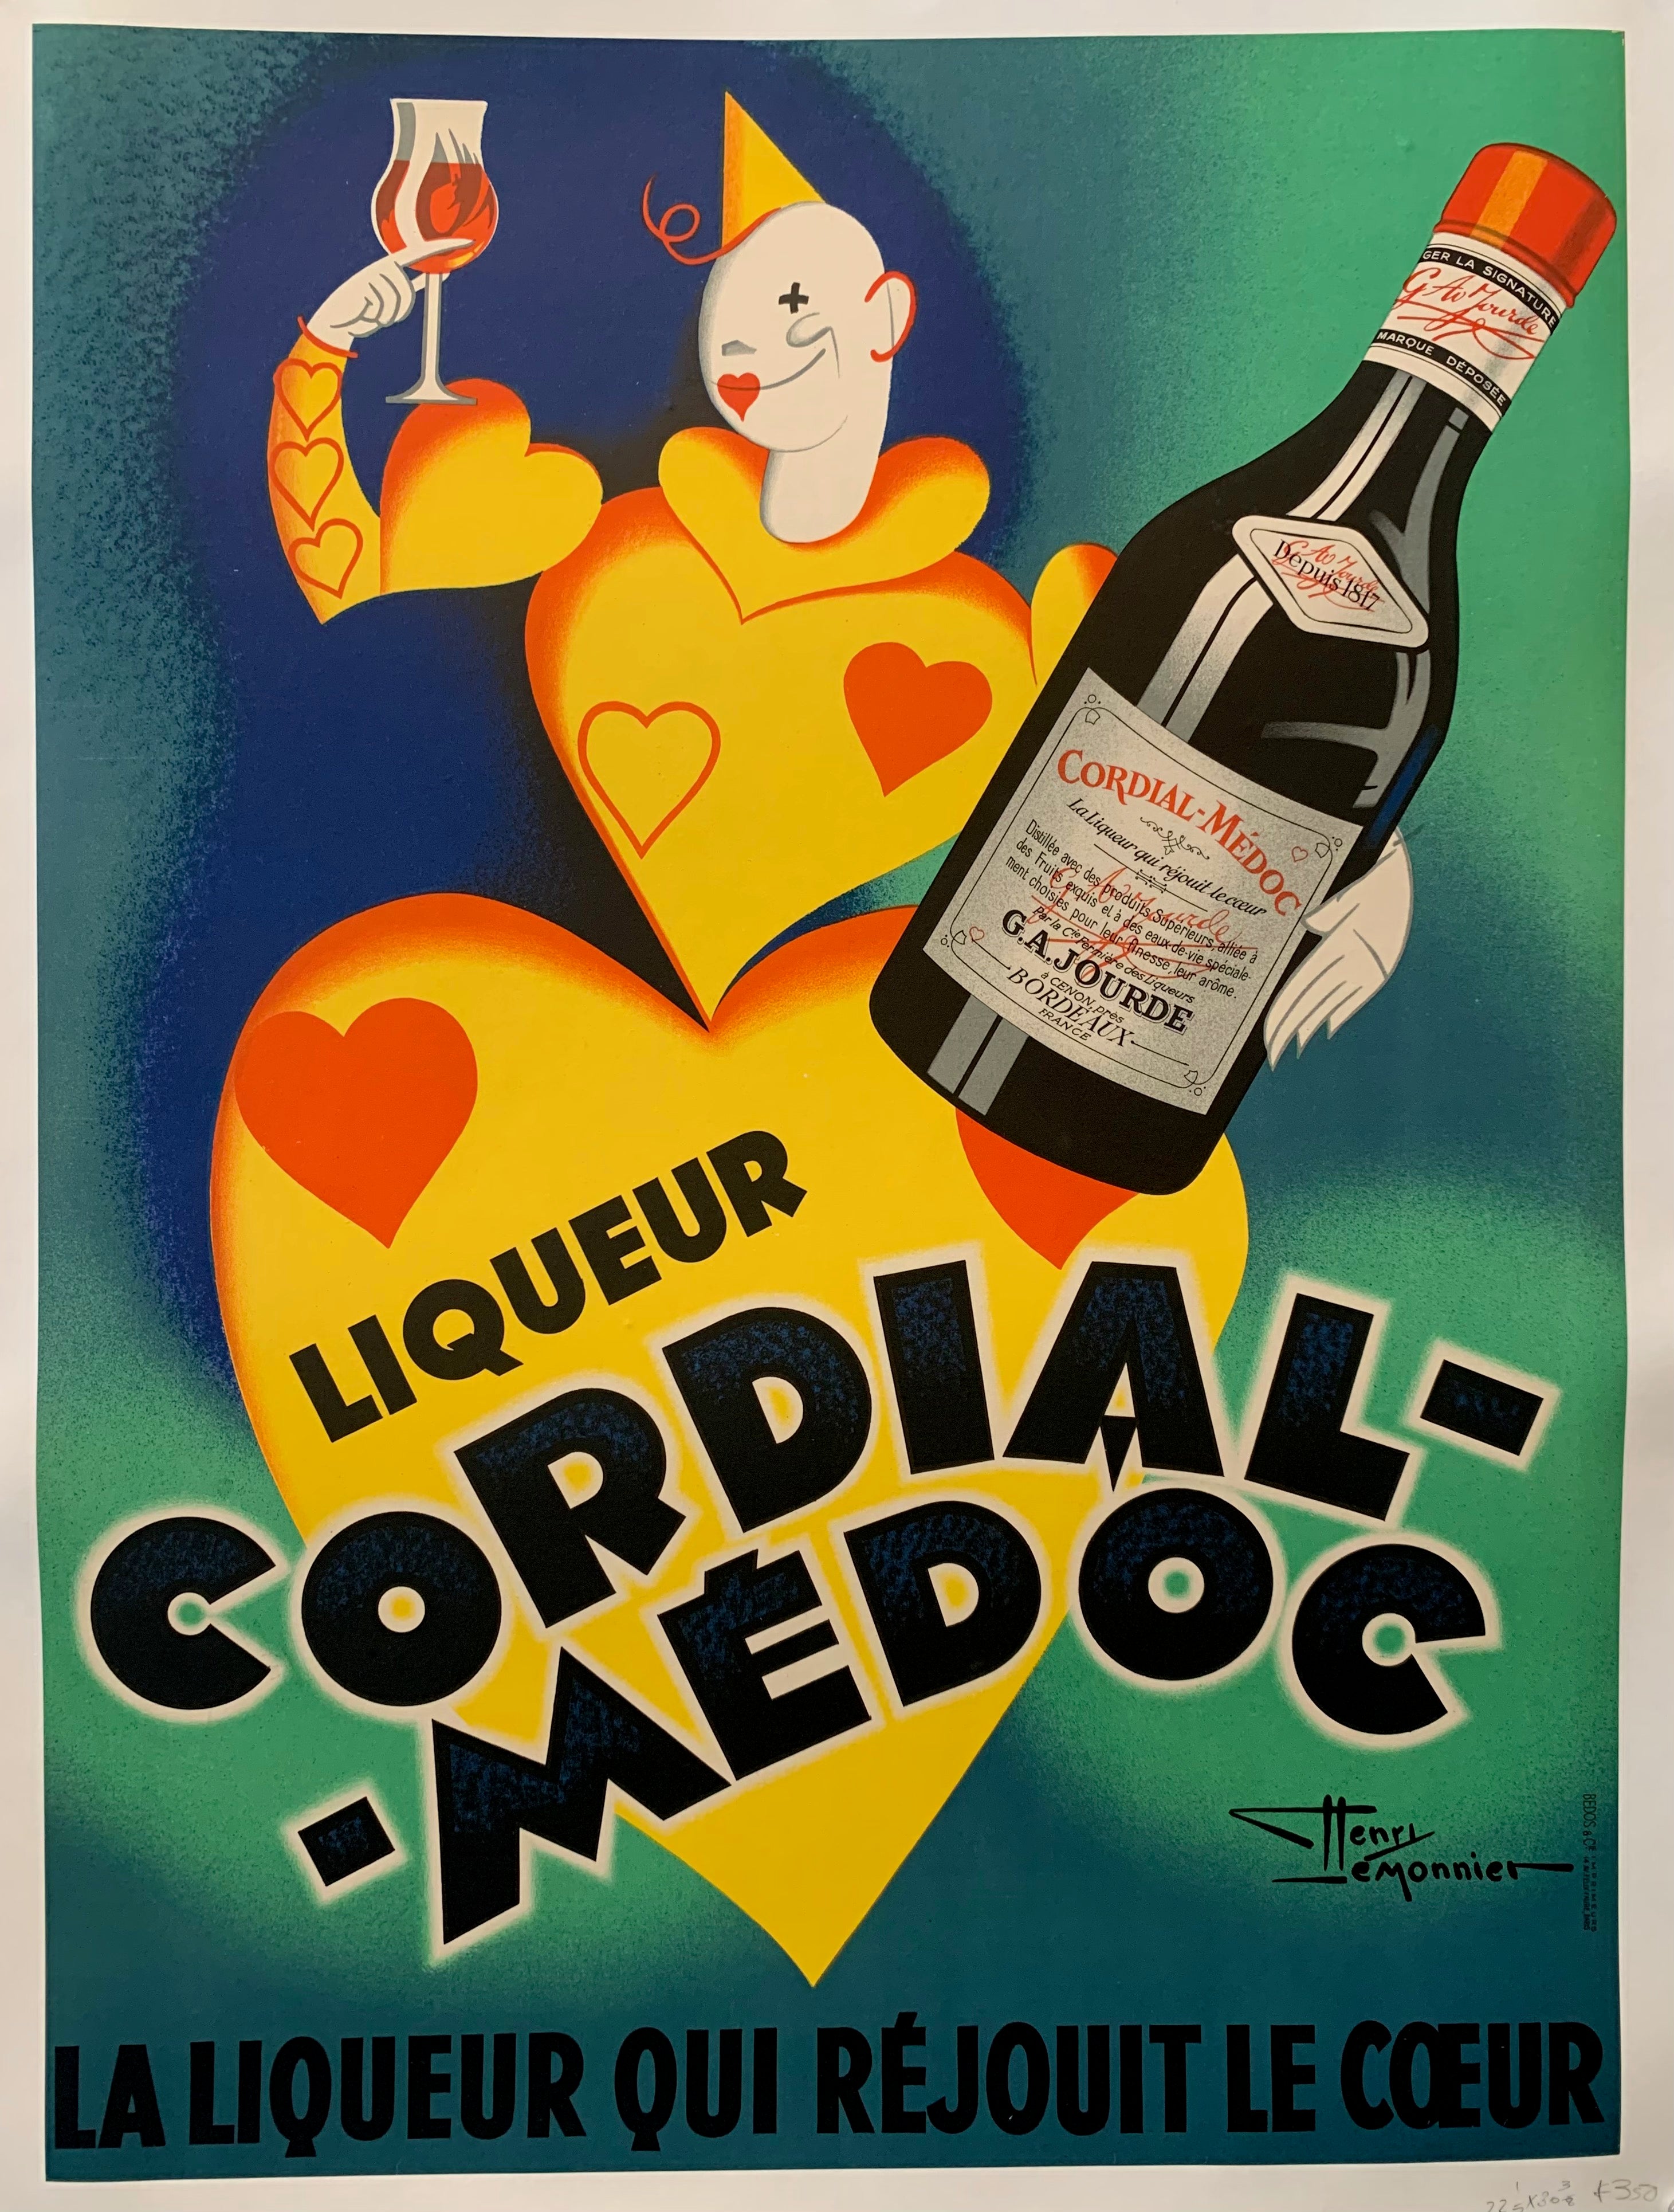 Large Cordial Medoc Poster